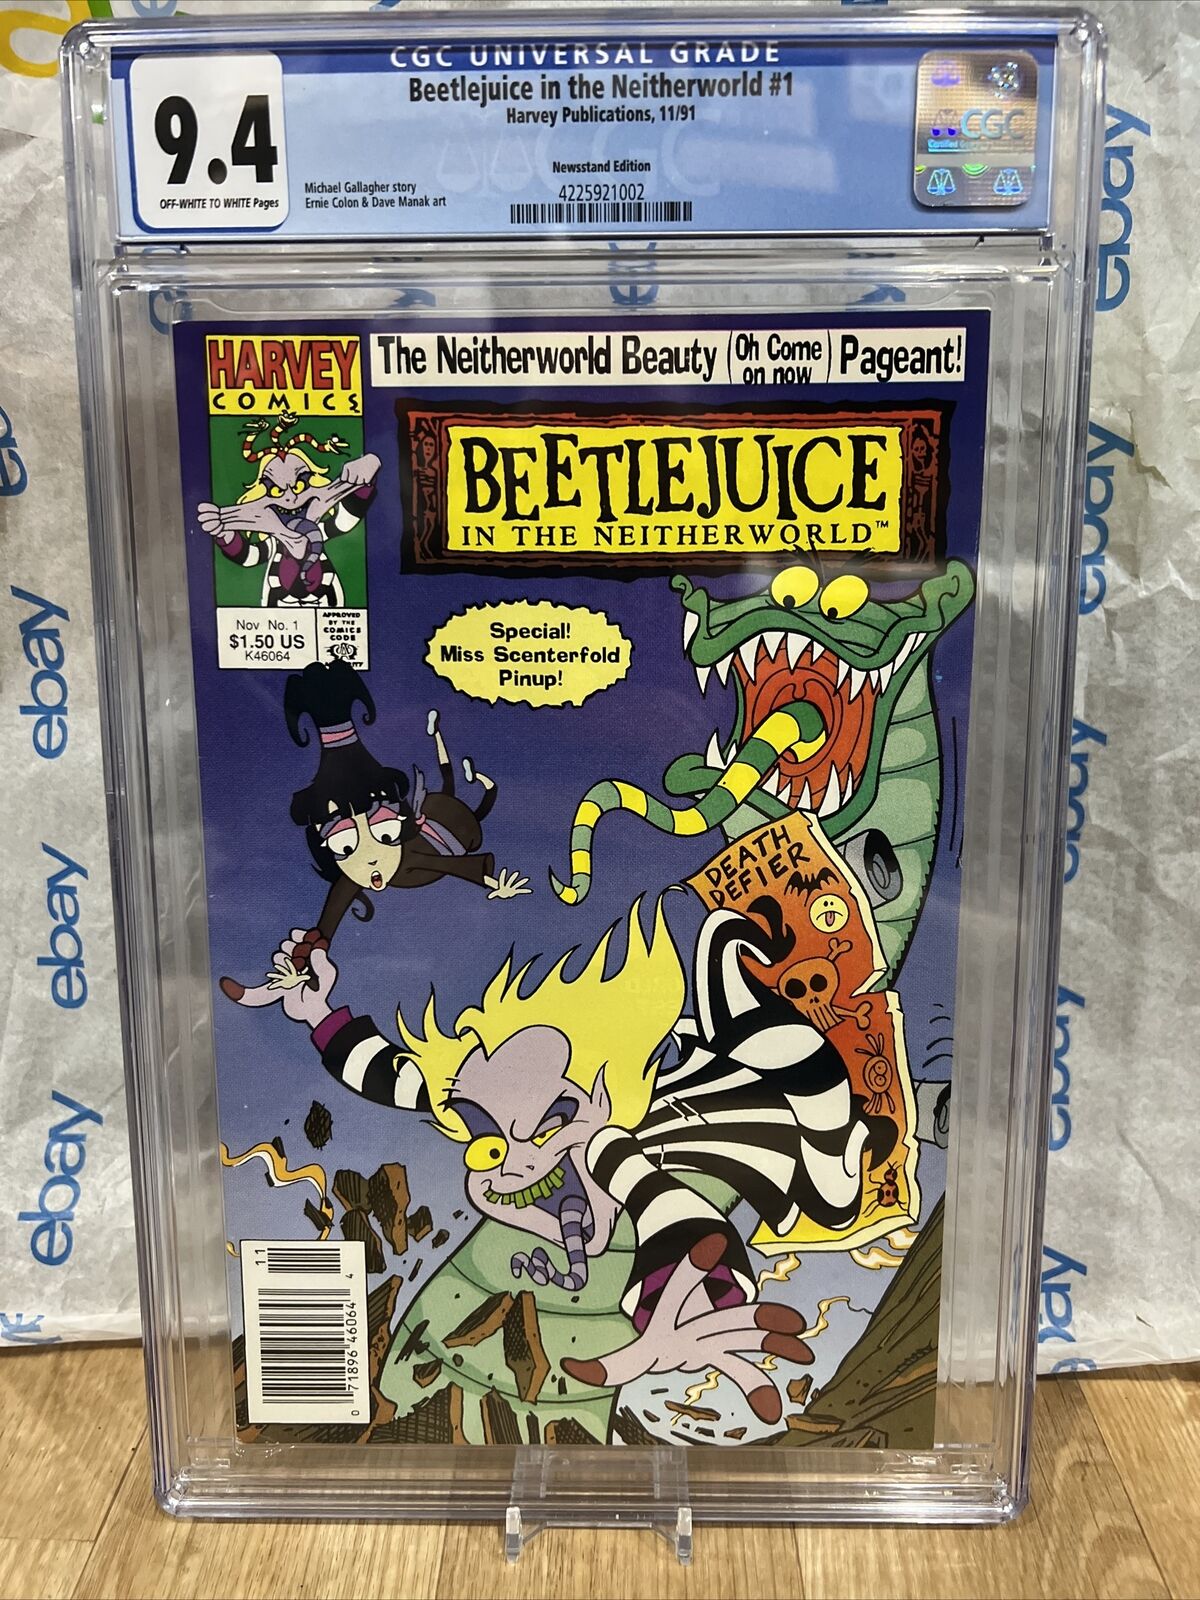 Beetlejuice in the Neitherworld #1 - CGC 9.4  comic graded new slab newsstand